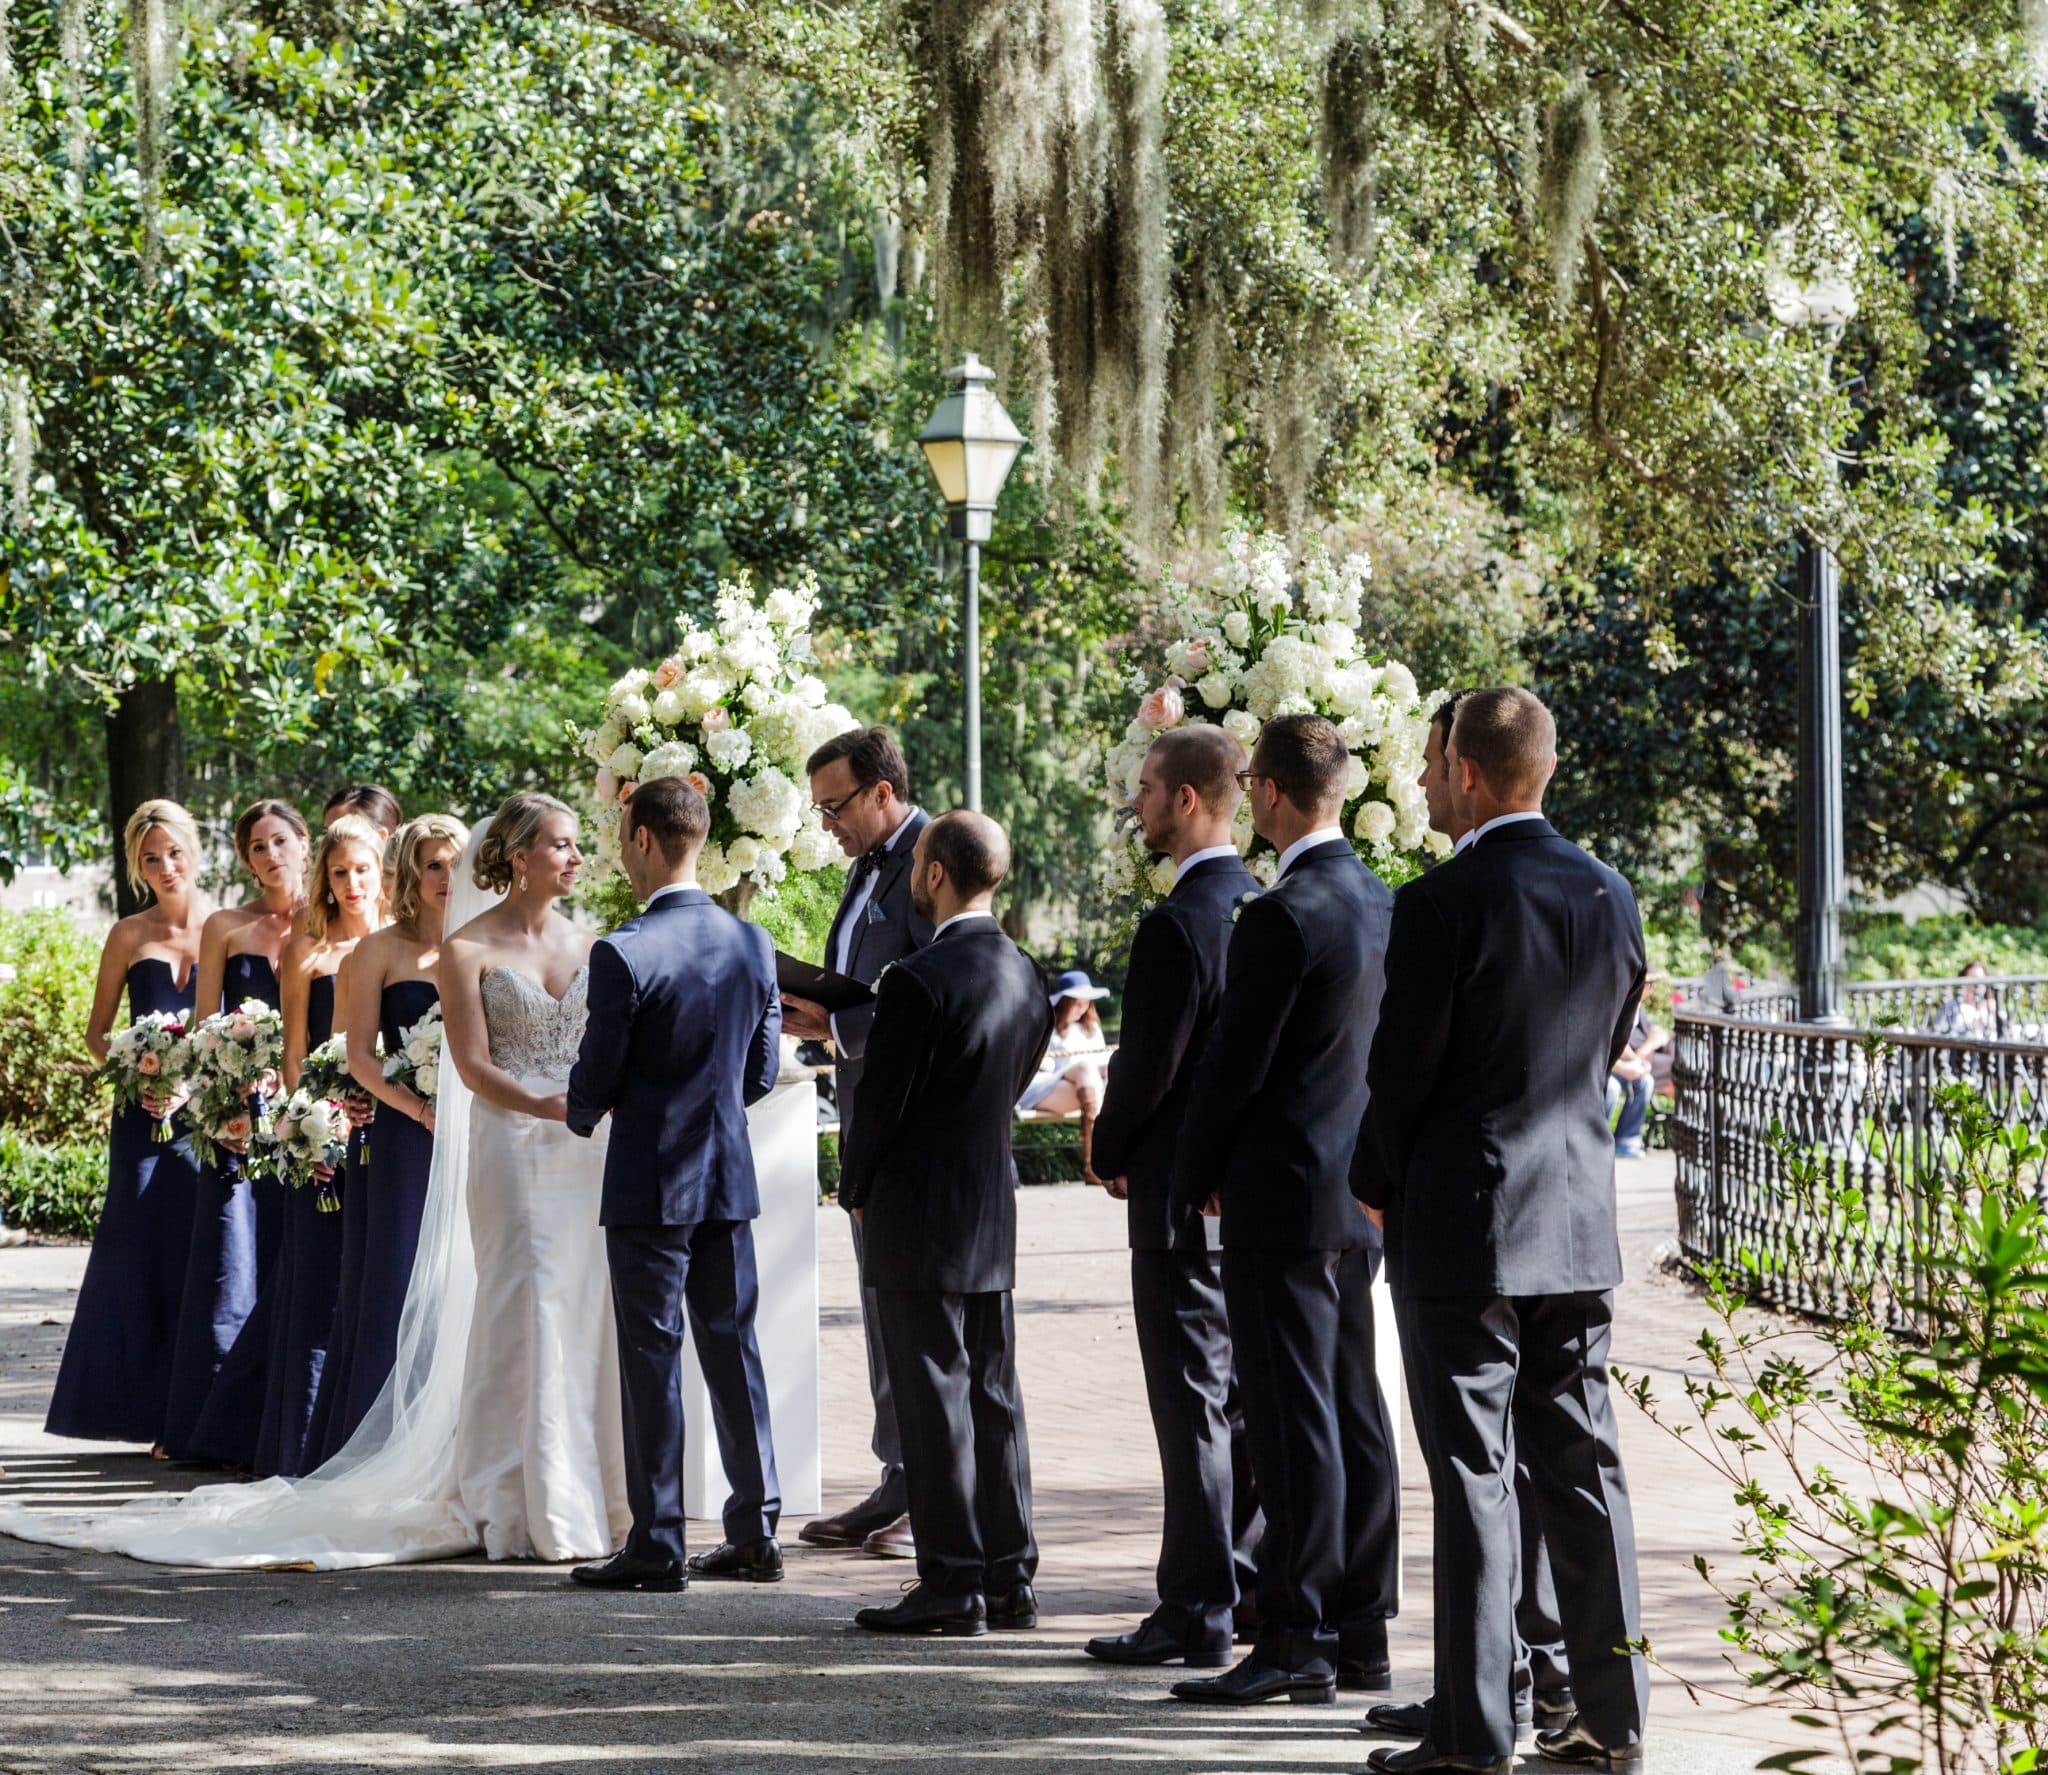 Savannah ranked as one of the top places in the country to have an outdoor wedding